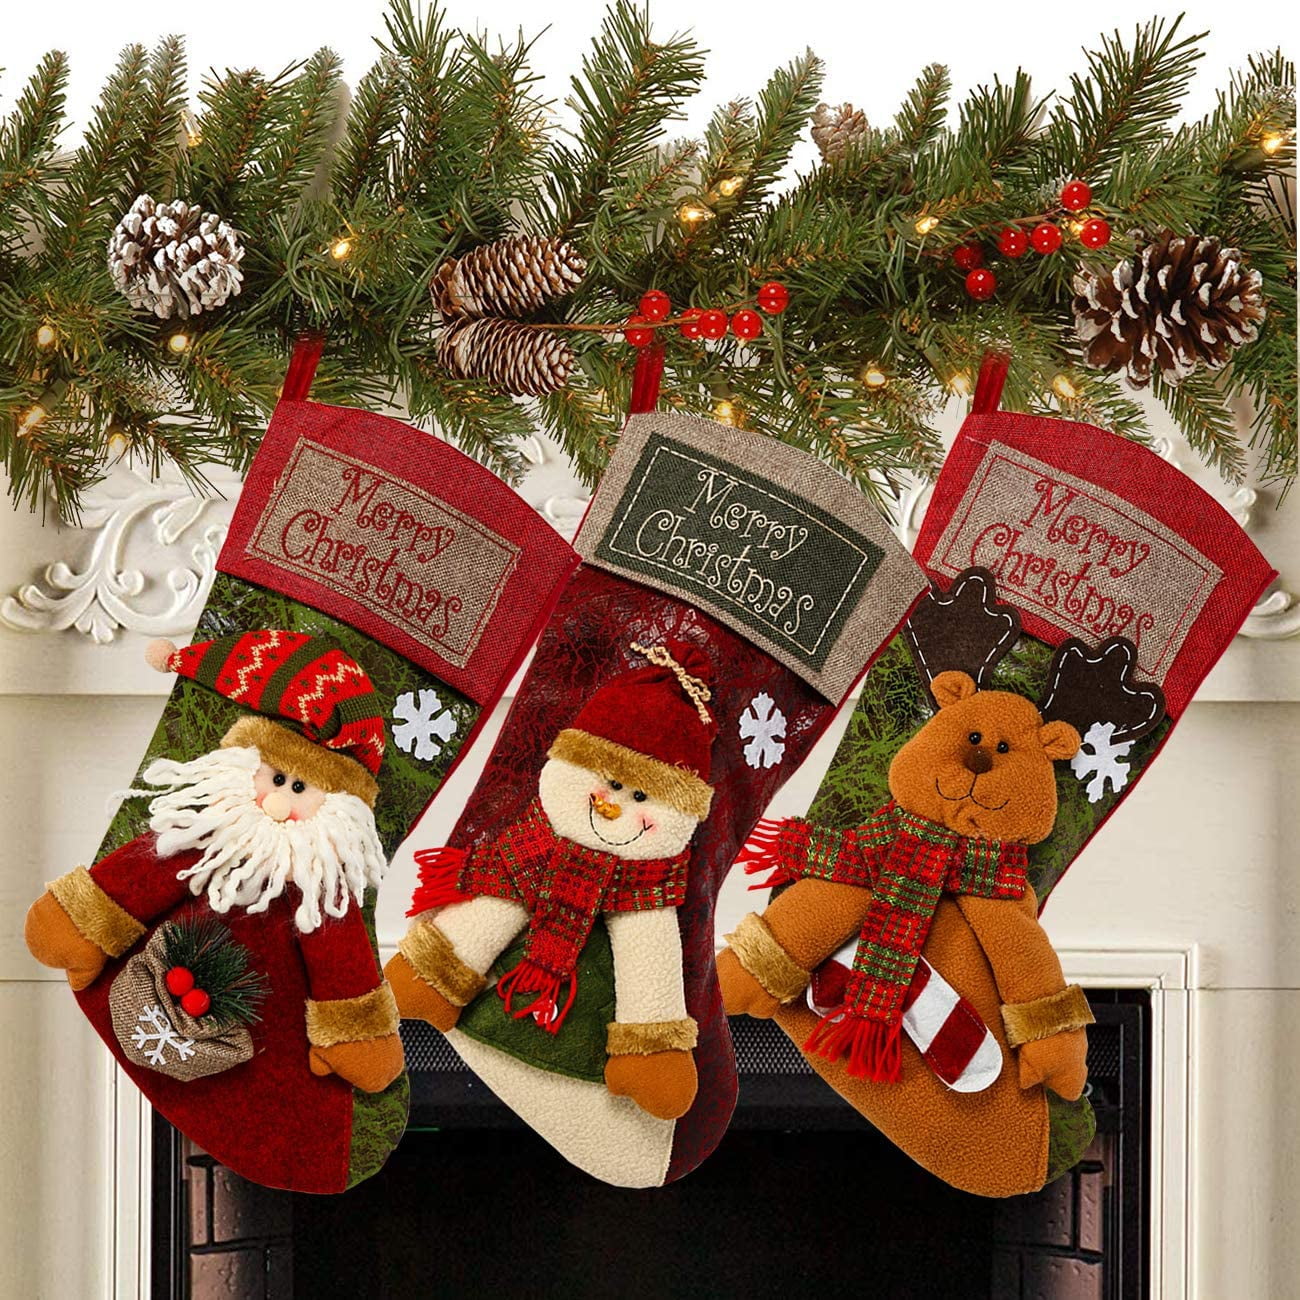 18" Christmas Stocking Classic Personalized Large Stockings for Christmas Decor 